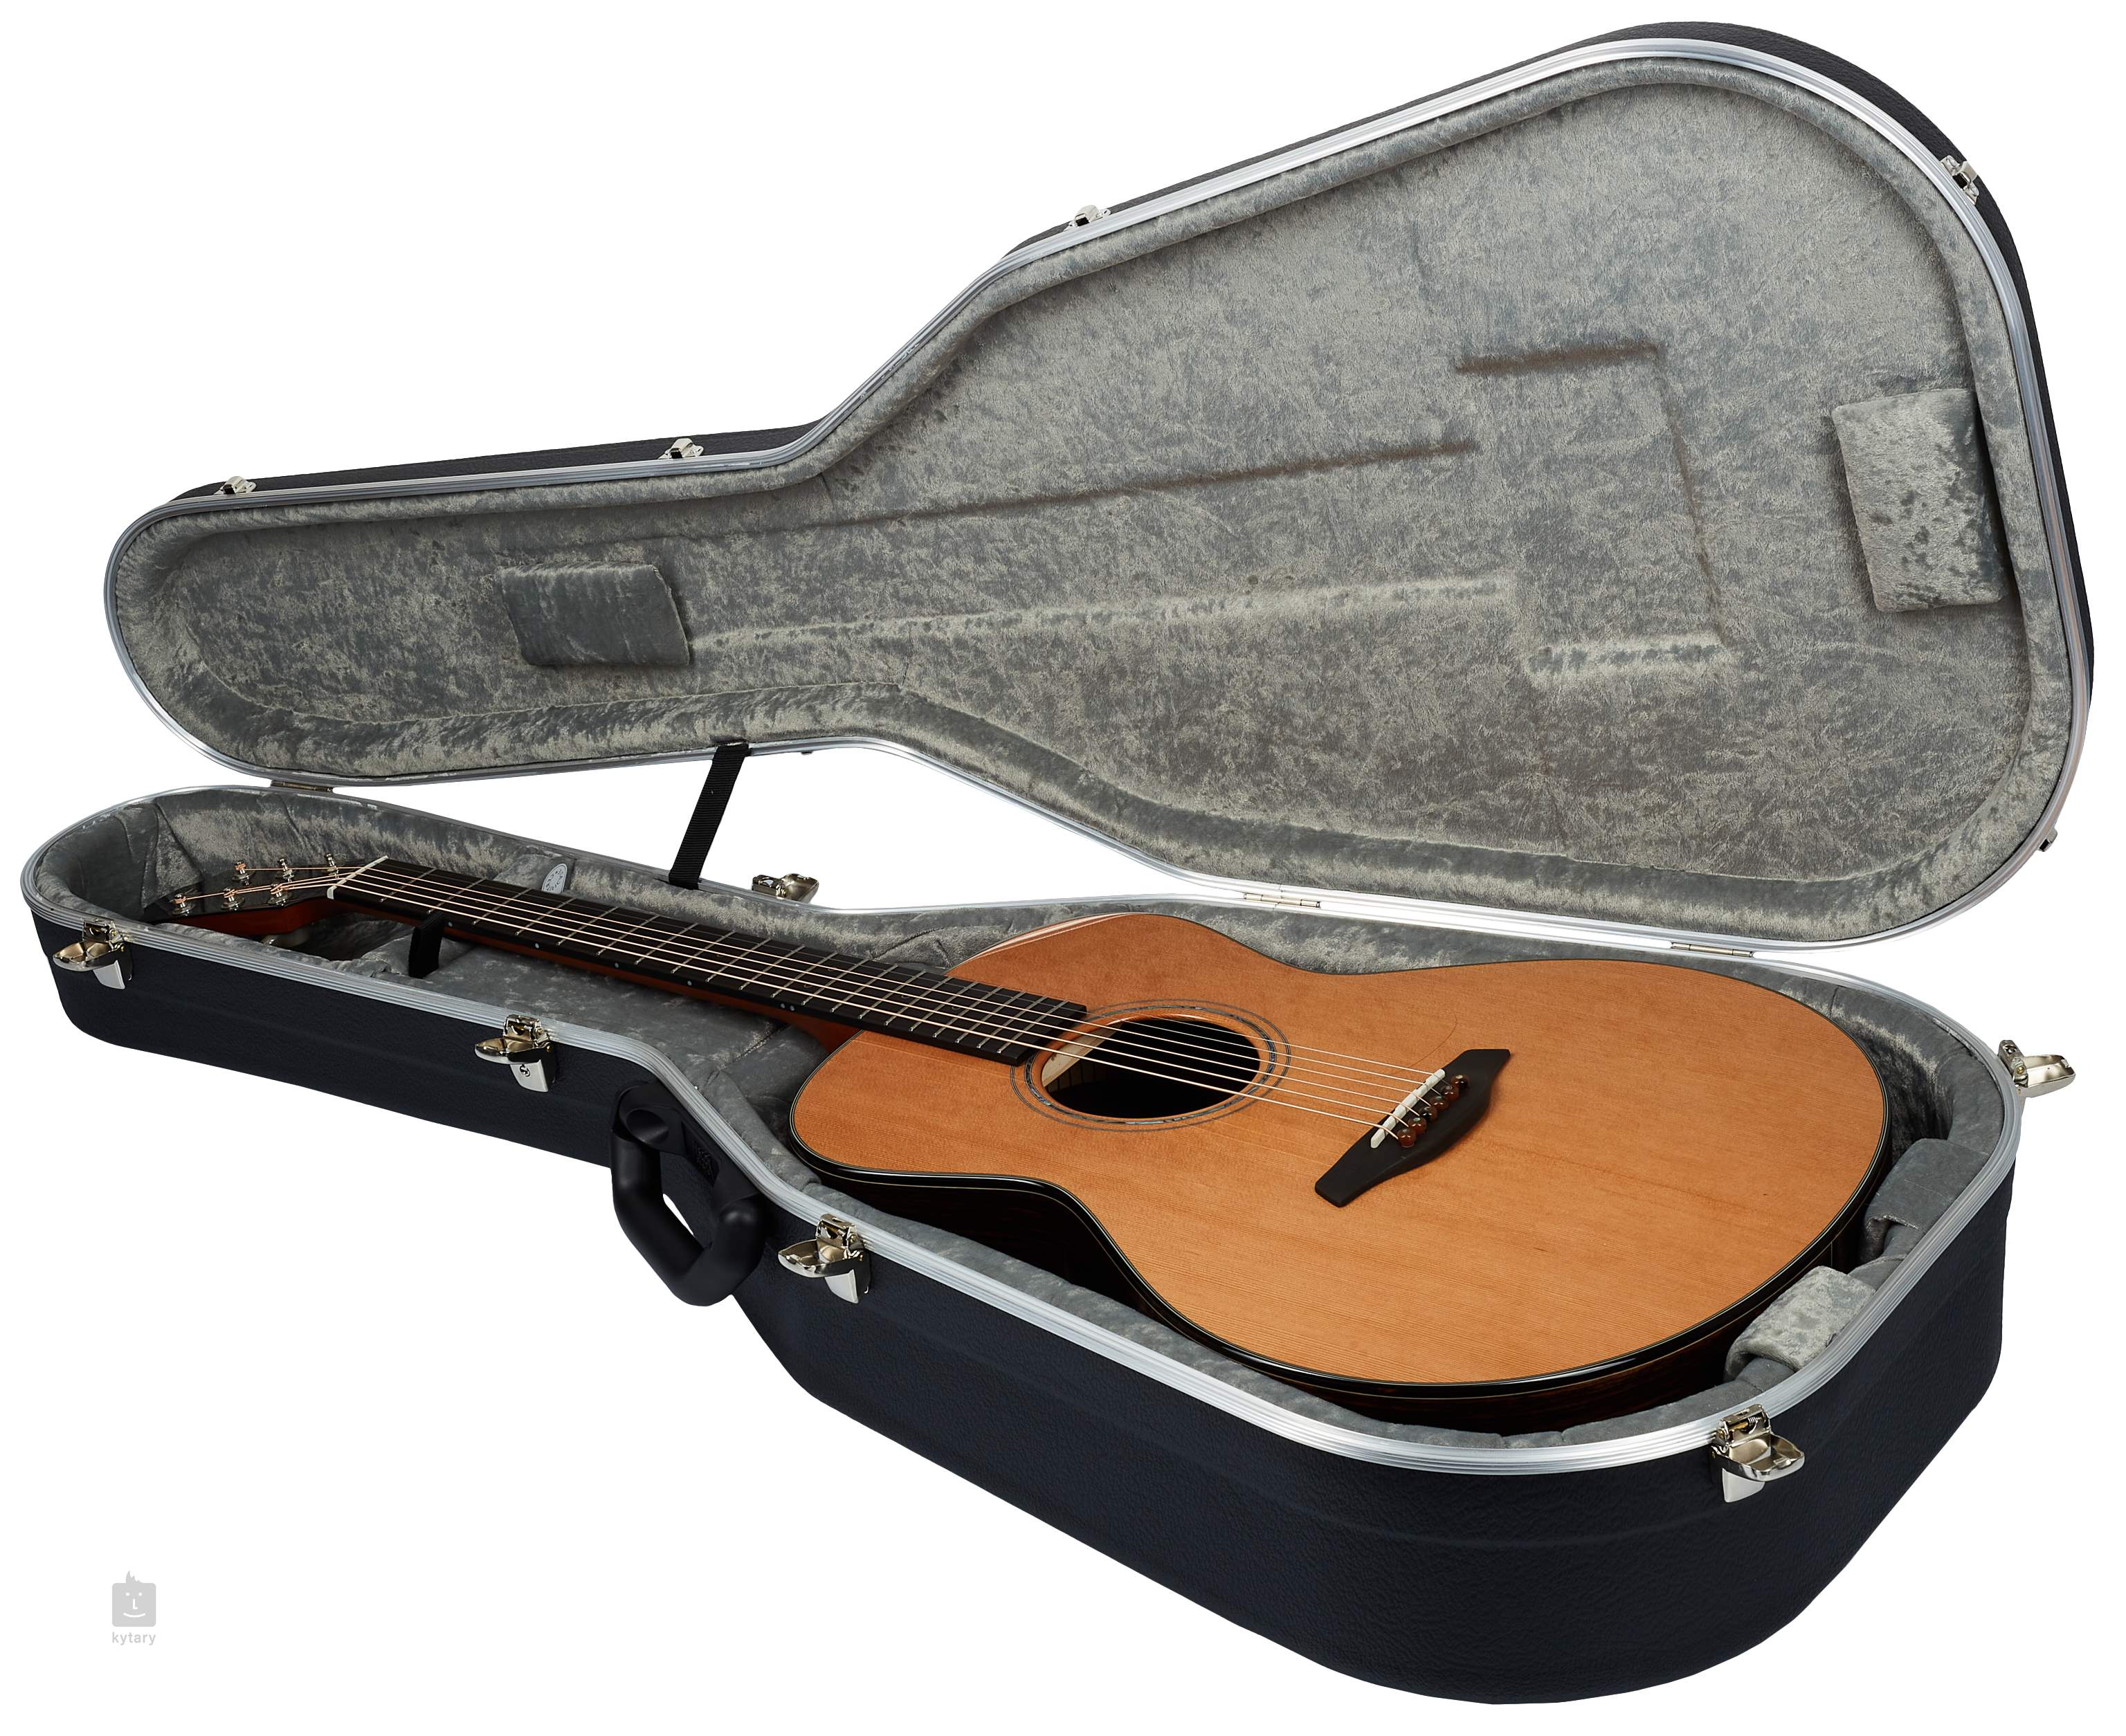 Furch G-cr Yellow Grand Auditorium Cedre Palissandre Eb - Natural Full-pore - Acoustic guitar & electro - Variation 6